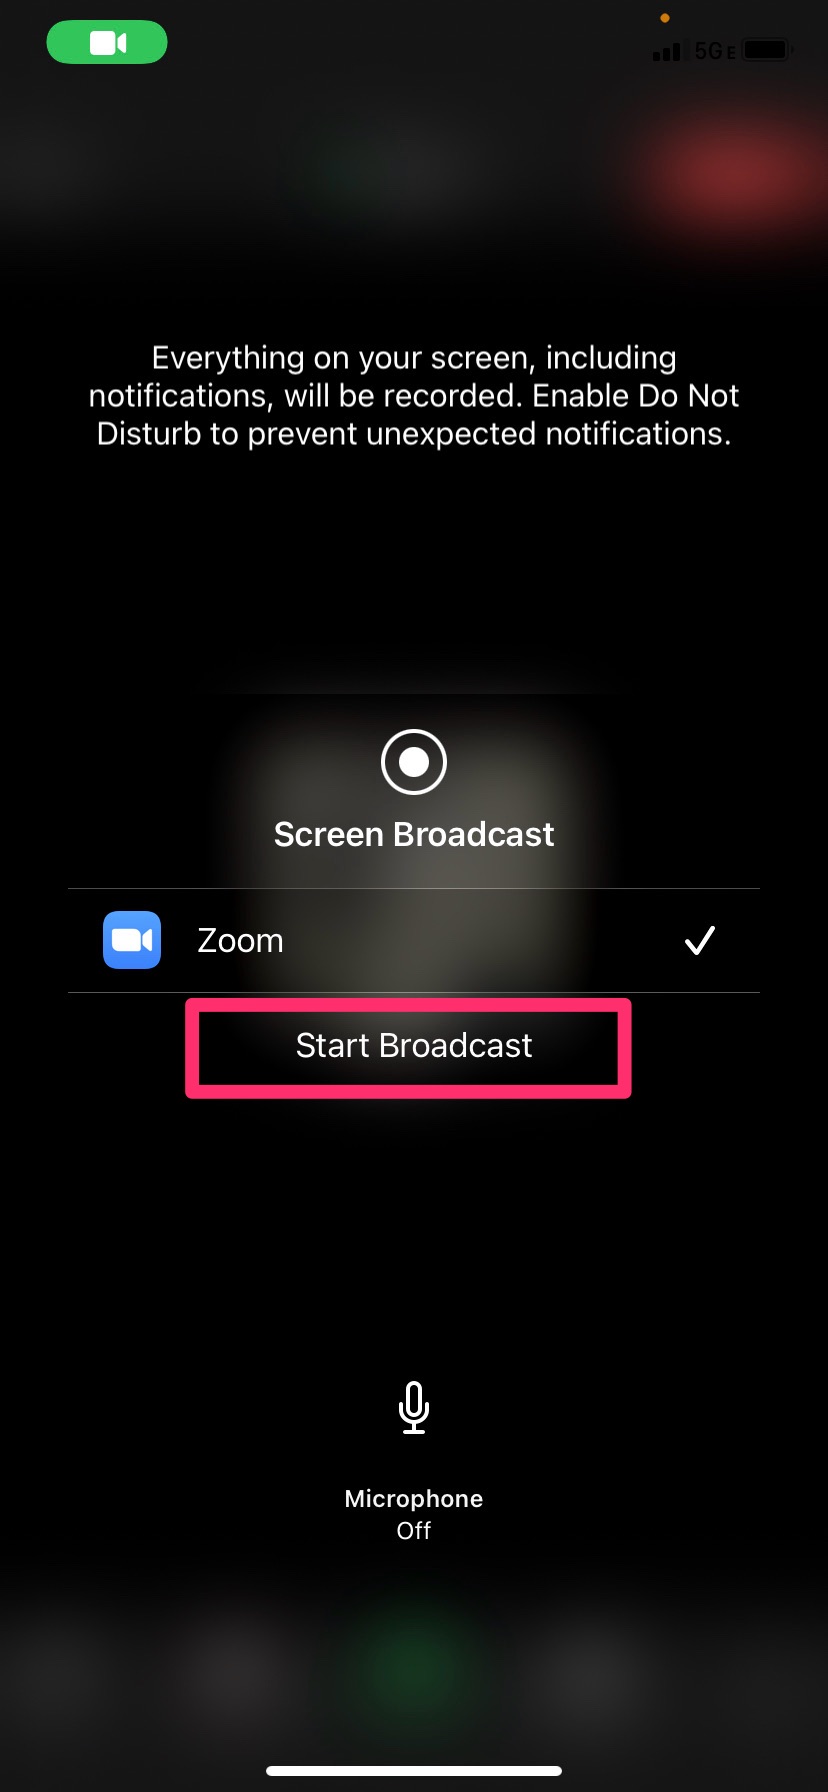 Screenshot explaining that everything on your screen will be recorded and suggesting you select the Start Broadcast button.